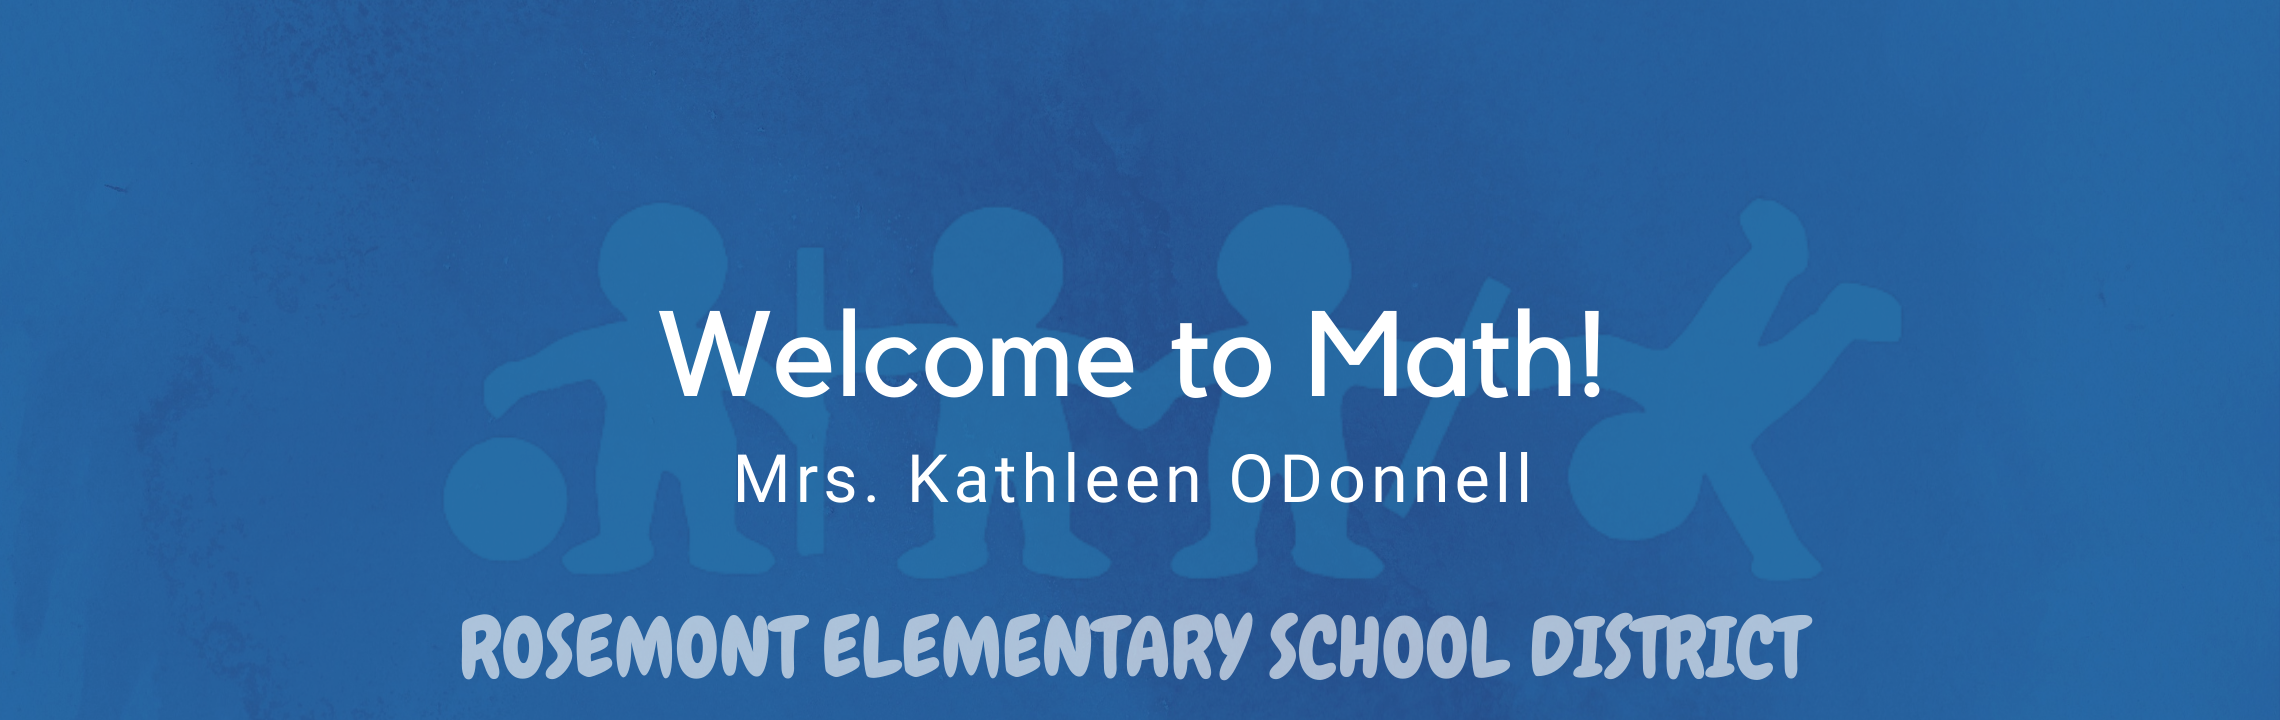 Welcome to Math! Mrs. Kathleen O'Donnell